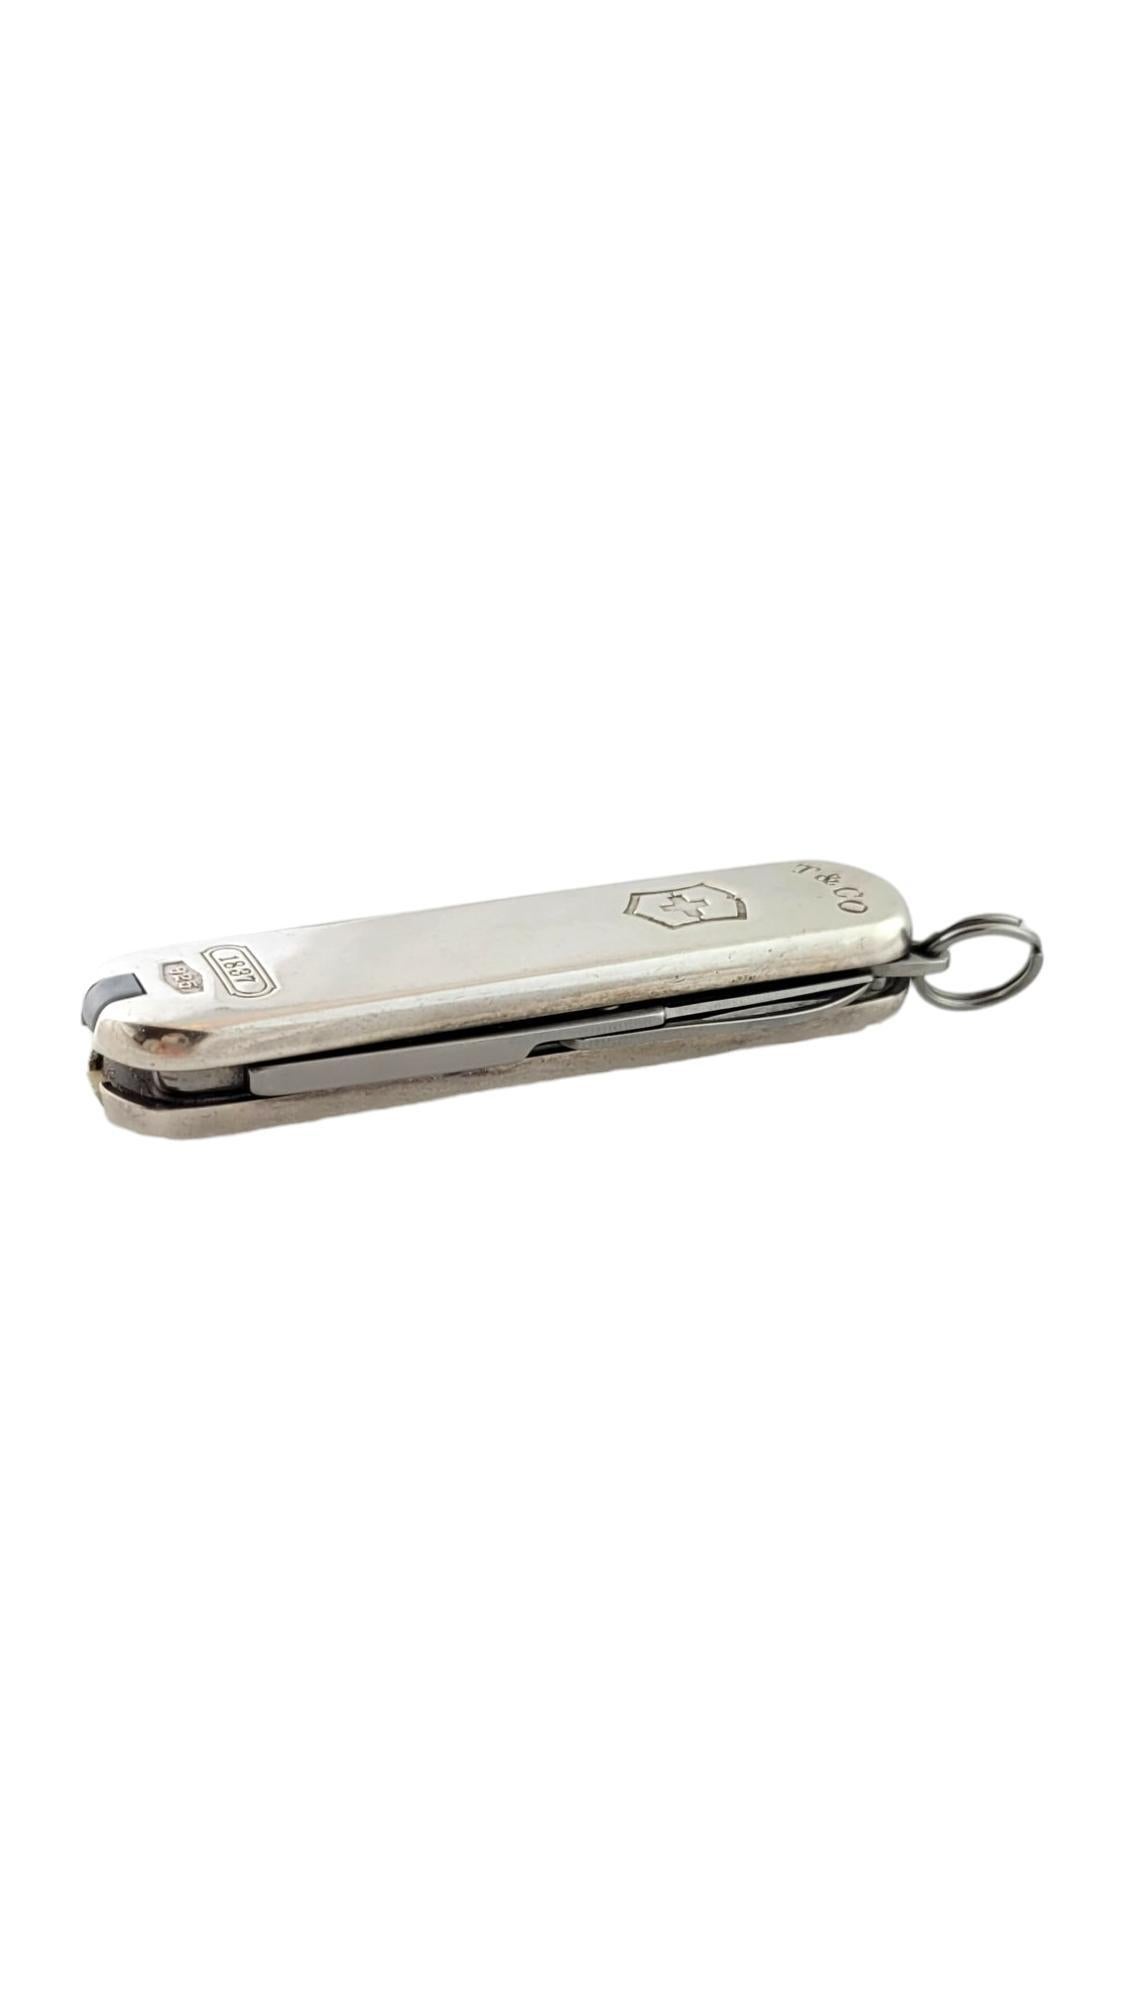 Tiffany & Co. Sterling Silver Pocket Knife

This gorgeous pocketknife by designer Tiffany & Co. is crafted from 925 sterling silver and if not only beautiful but very handy as well!

Size: 58.90mm X 17.25mm X 9.08mm

Weight: 28.80 dwt/ 44.79